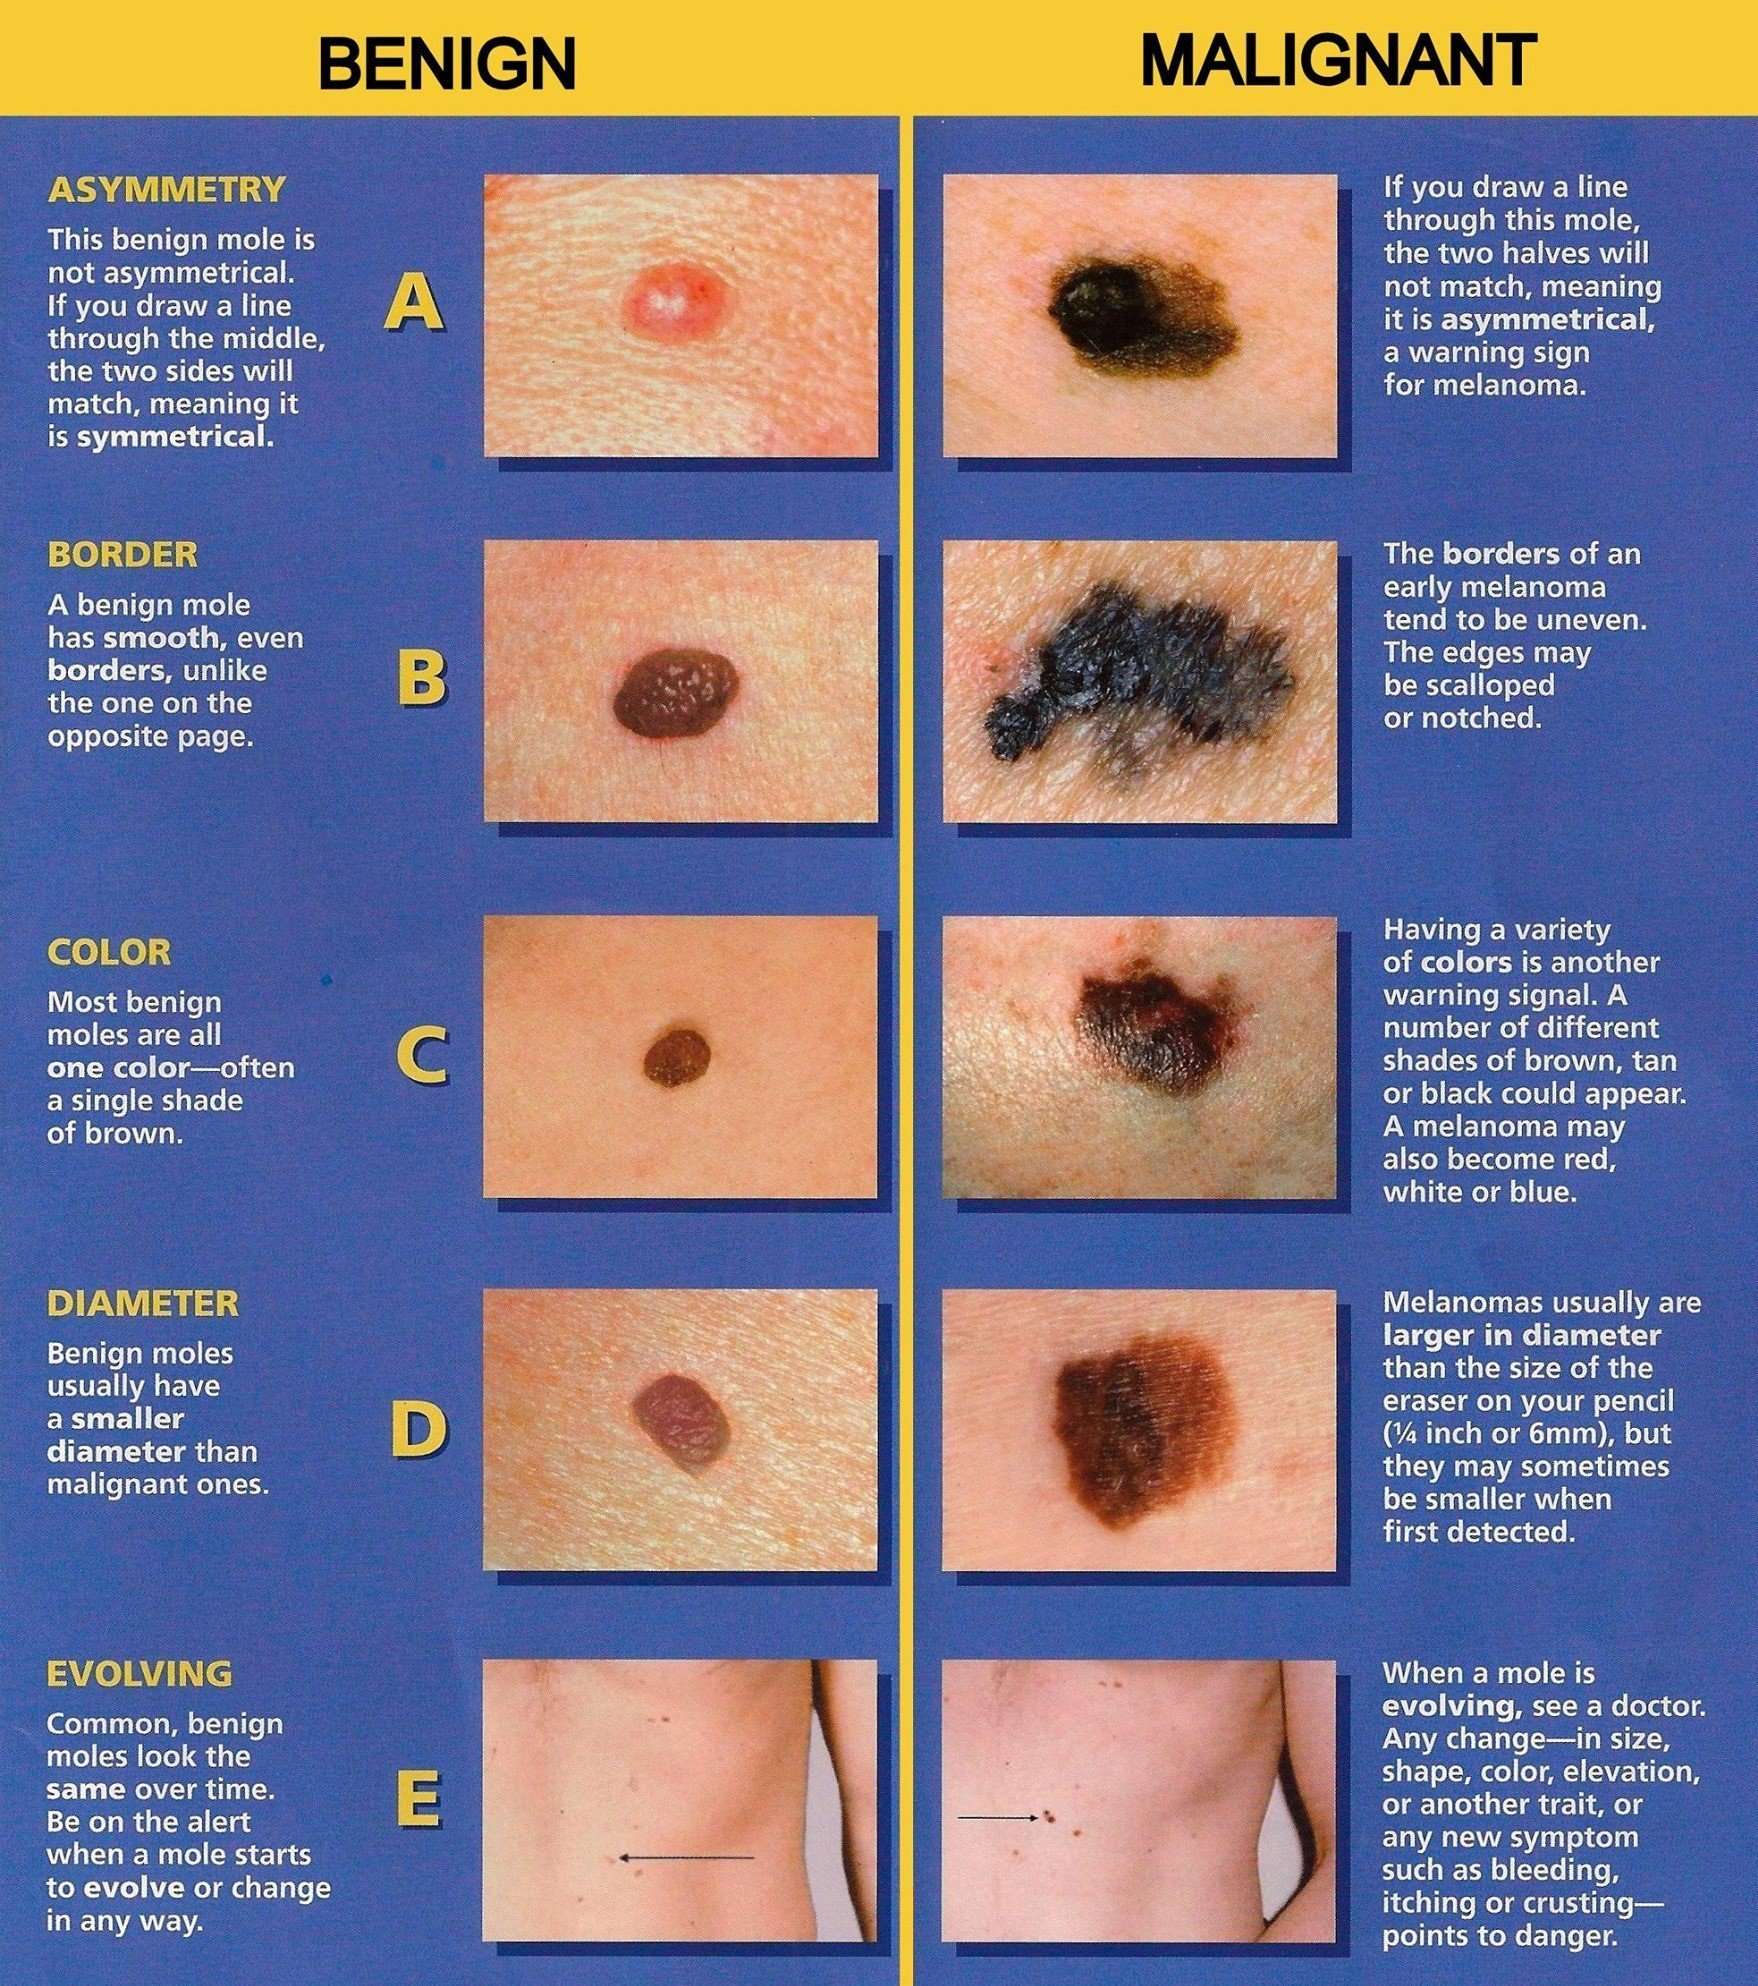 Melanoma: How do you know if a mole is dangerous?